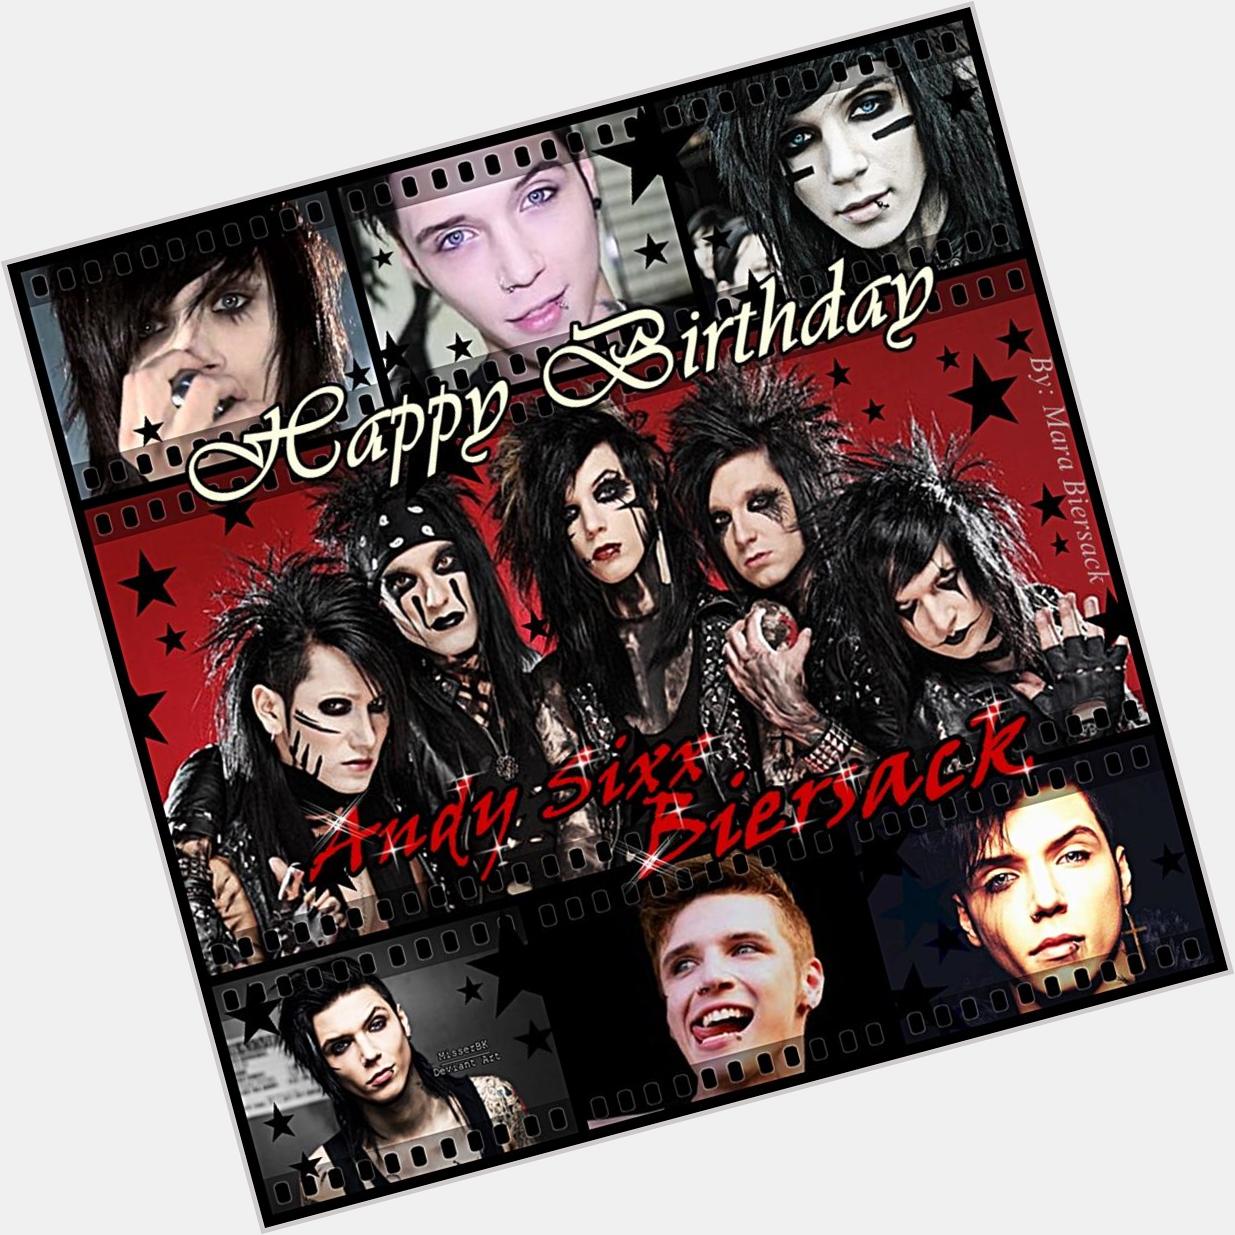  We of the BVB Army, we wish you a happy birthday!! Much peace and love to you Andy Biersack!! I LOVE U     